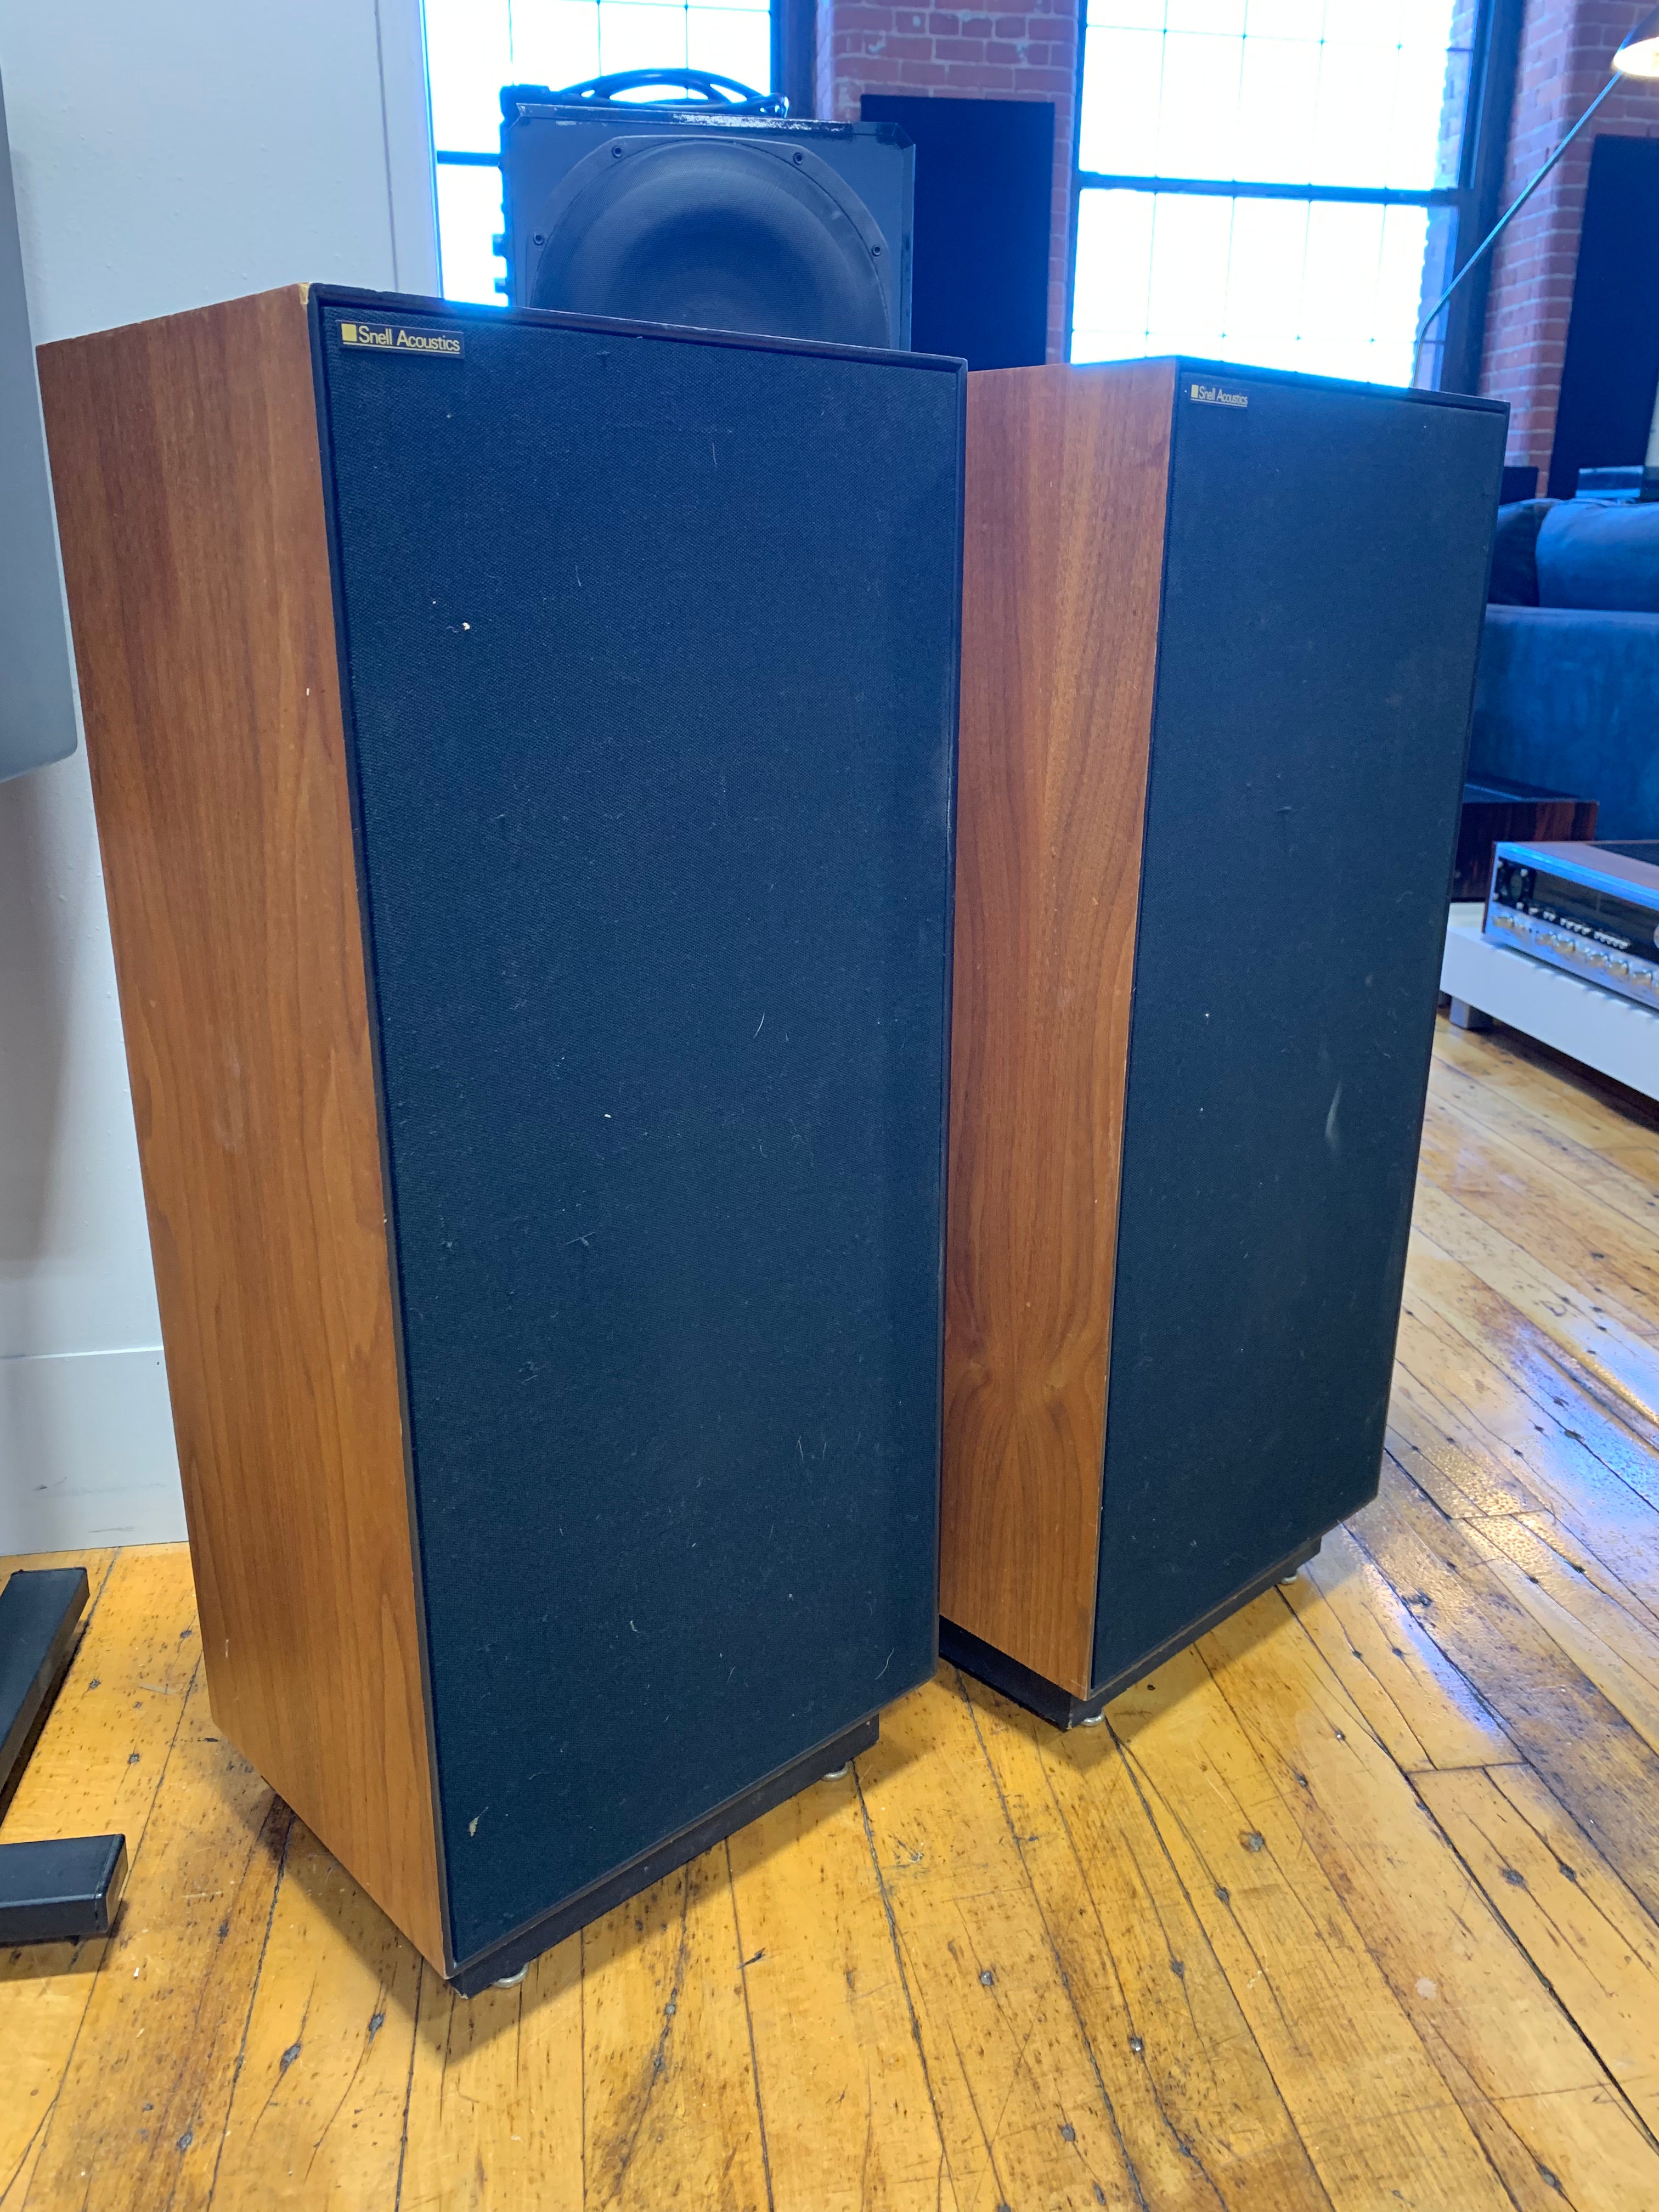 Snell Acoustics Type E Loudspeakers - From Snell Estate - SOLD